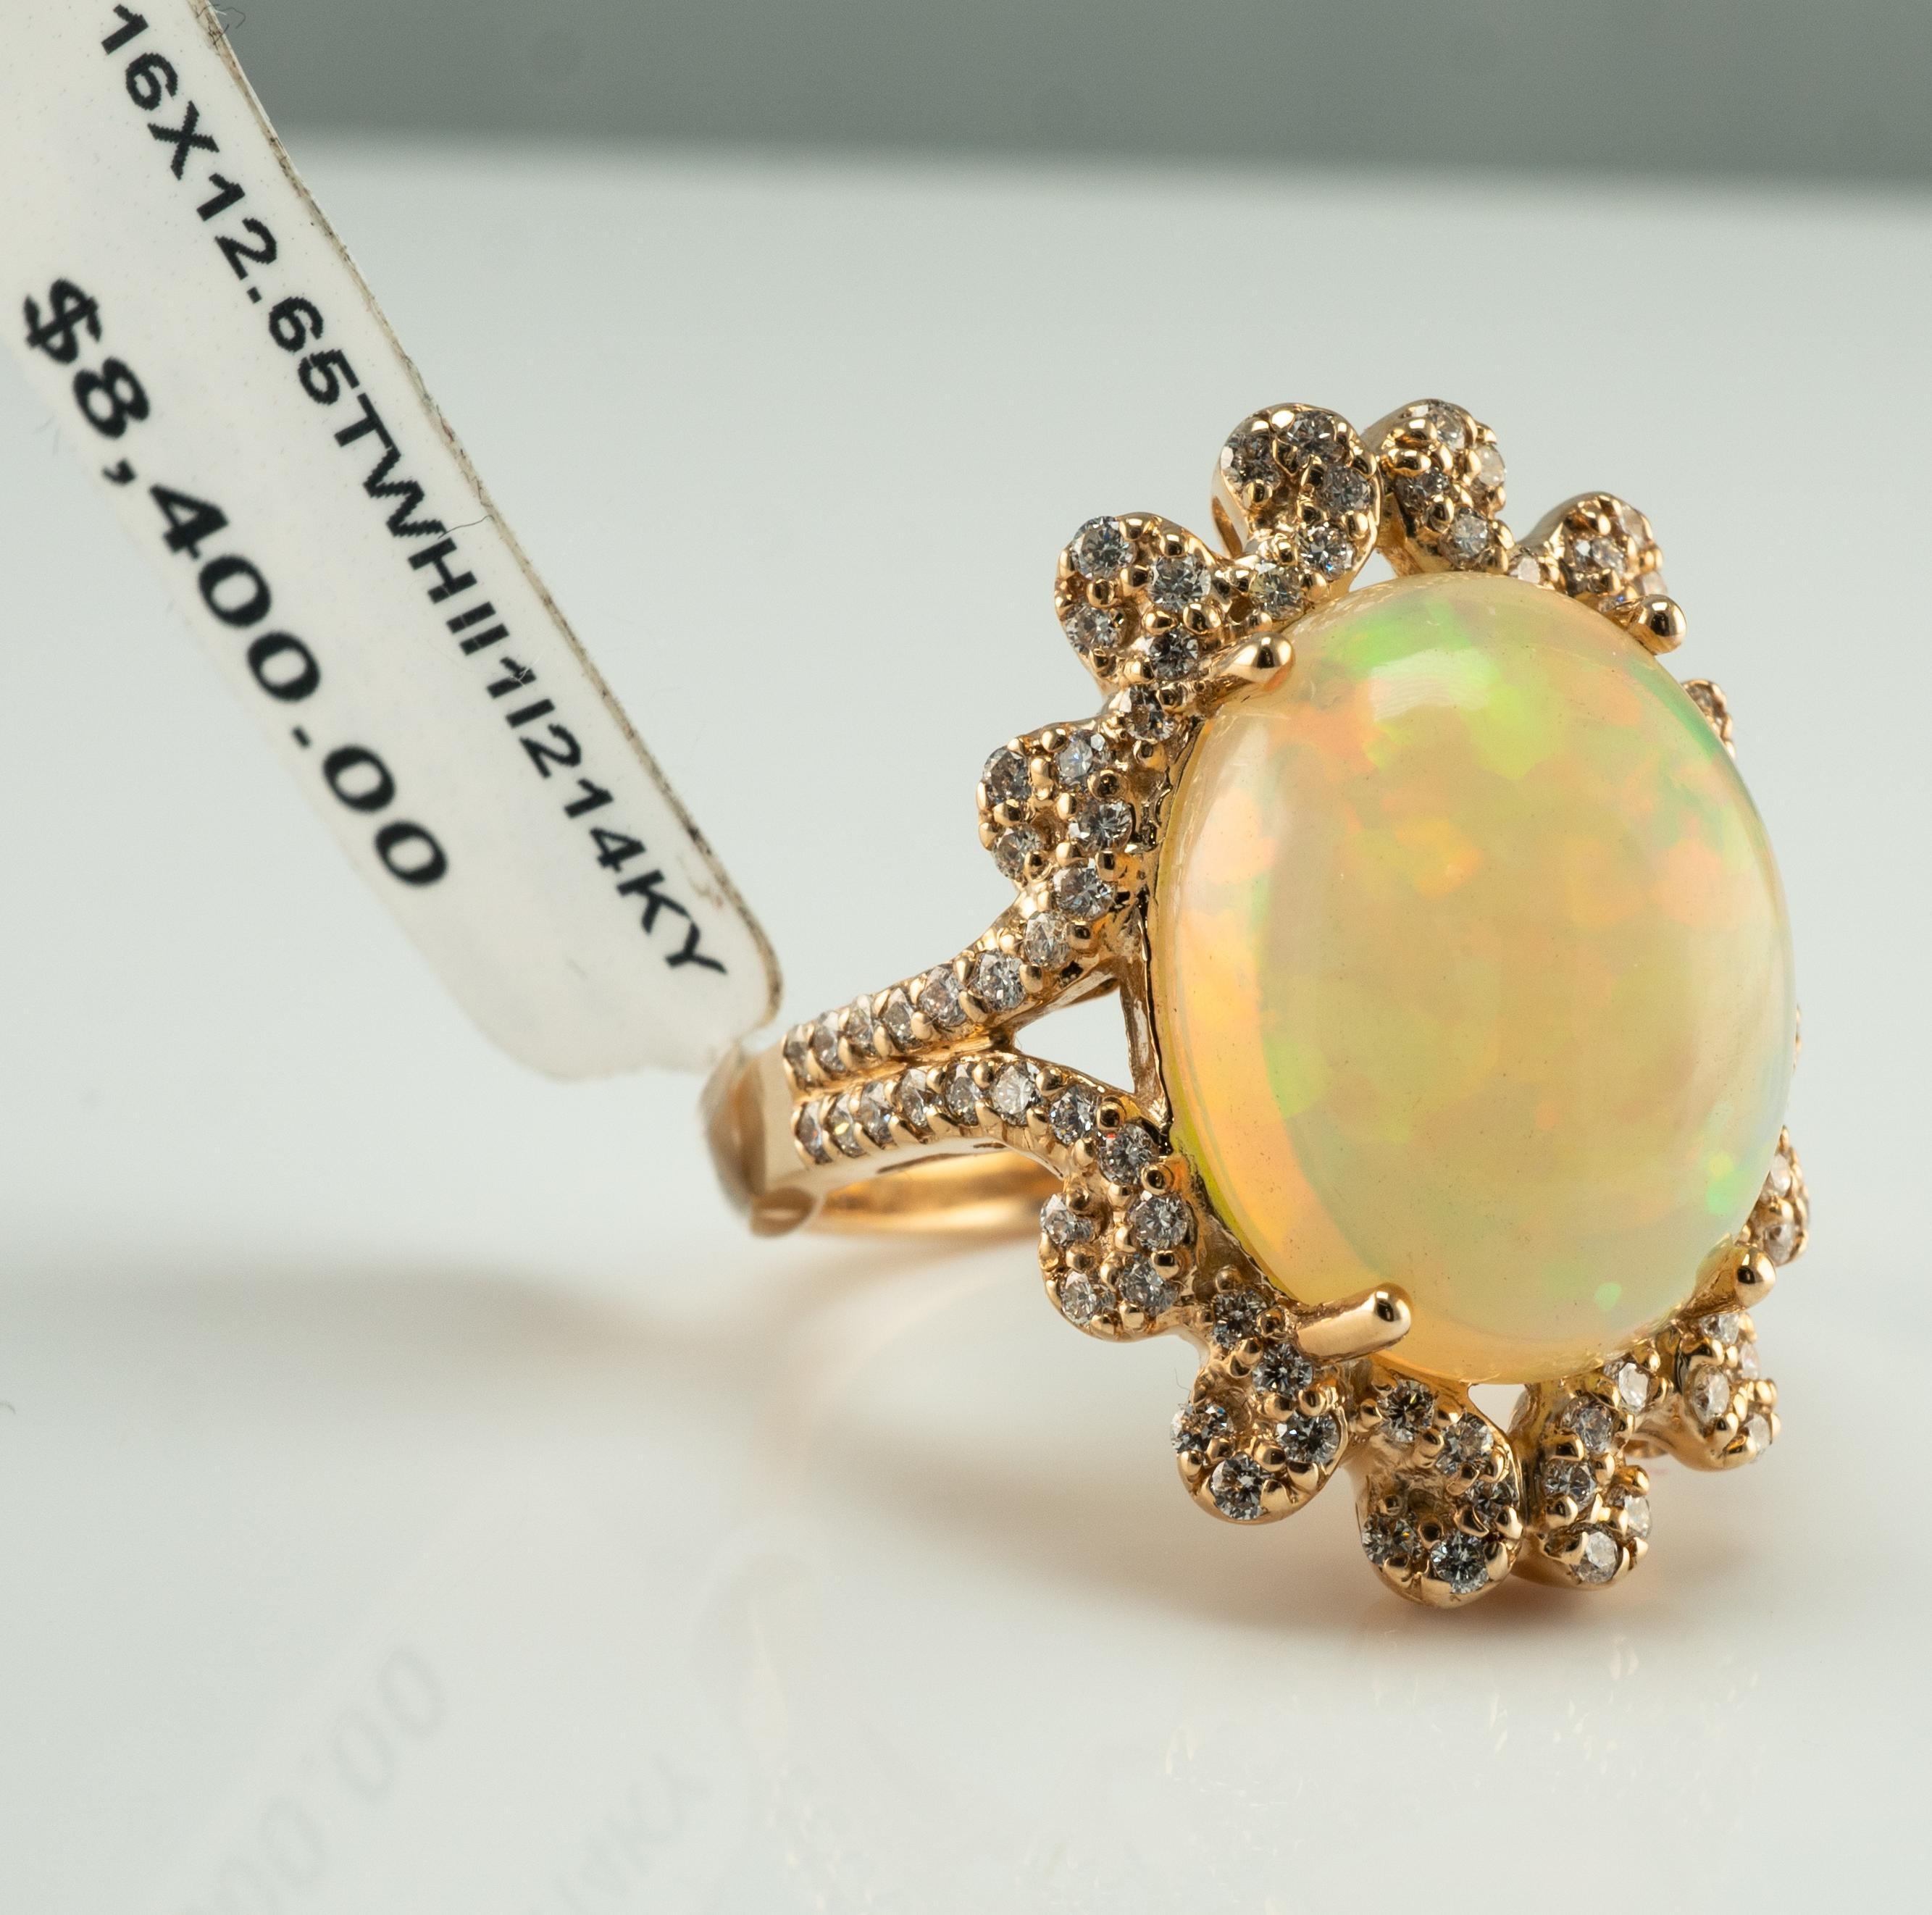 Diamond Crystal Opal Ring 14K Yellow Gold

This estate ring is made in solid 14K Yellow Gold and set with genuine Opal and diamonds.
The ring came to us from auction and still has an auction tag attached.
The center Earth mined Crystal Opal measures